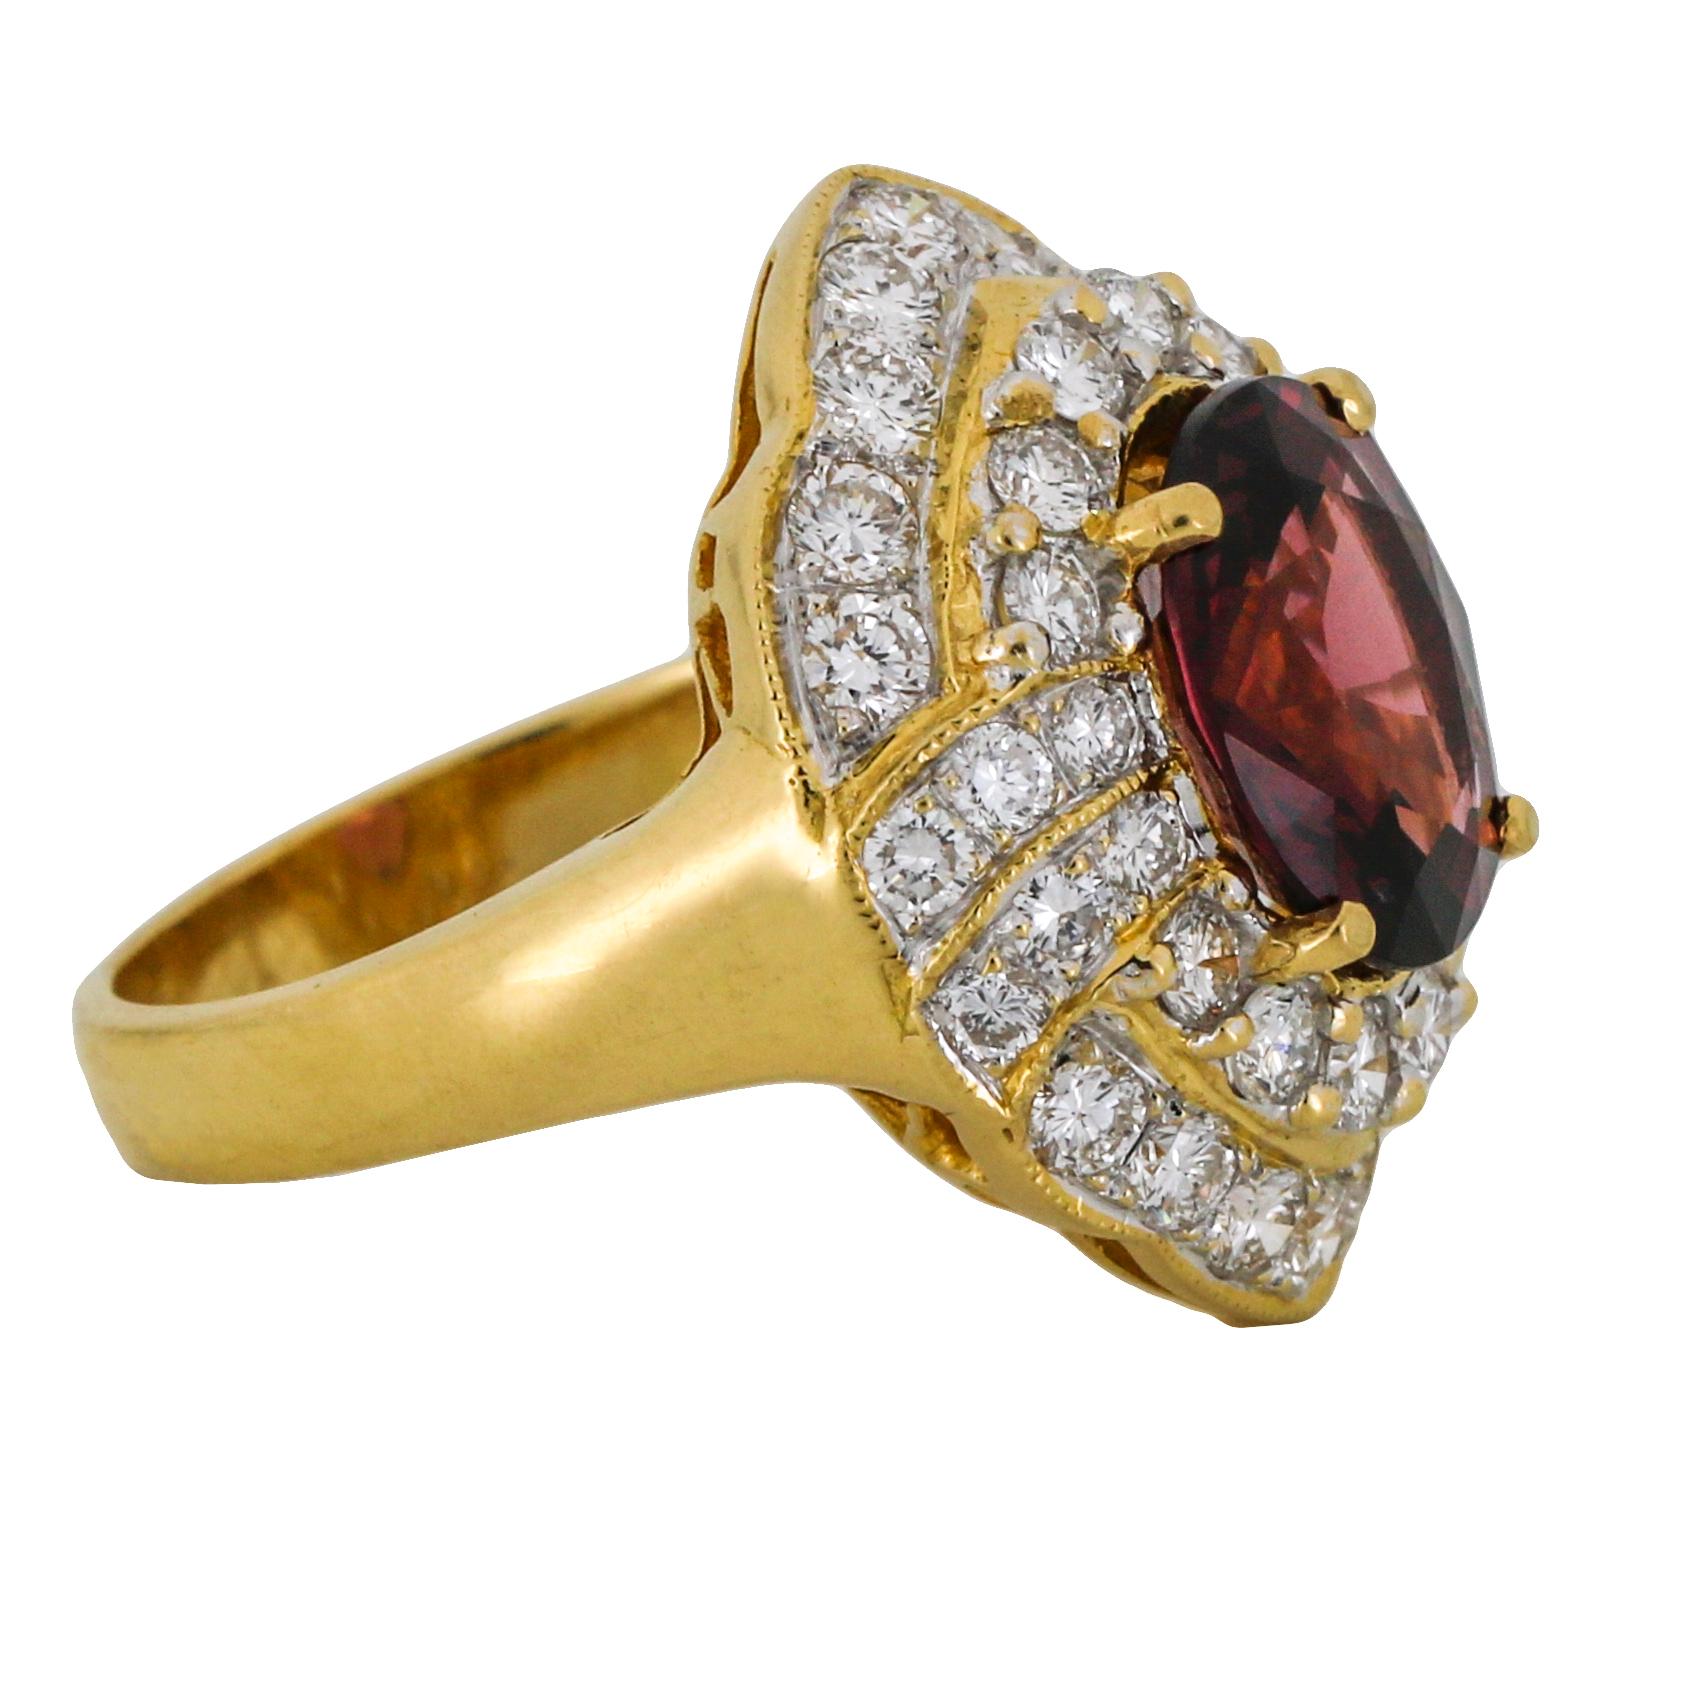 Oval Cut GIA 3.25 Carat Red Spinel Diamond Cocktail Ring in 18 Karat Yellow Gold For Sale